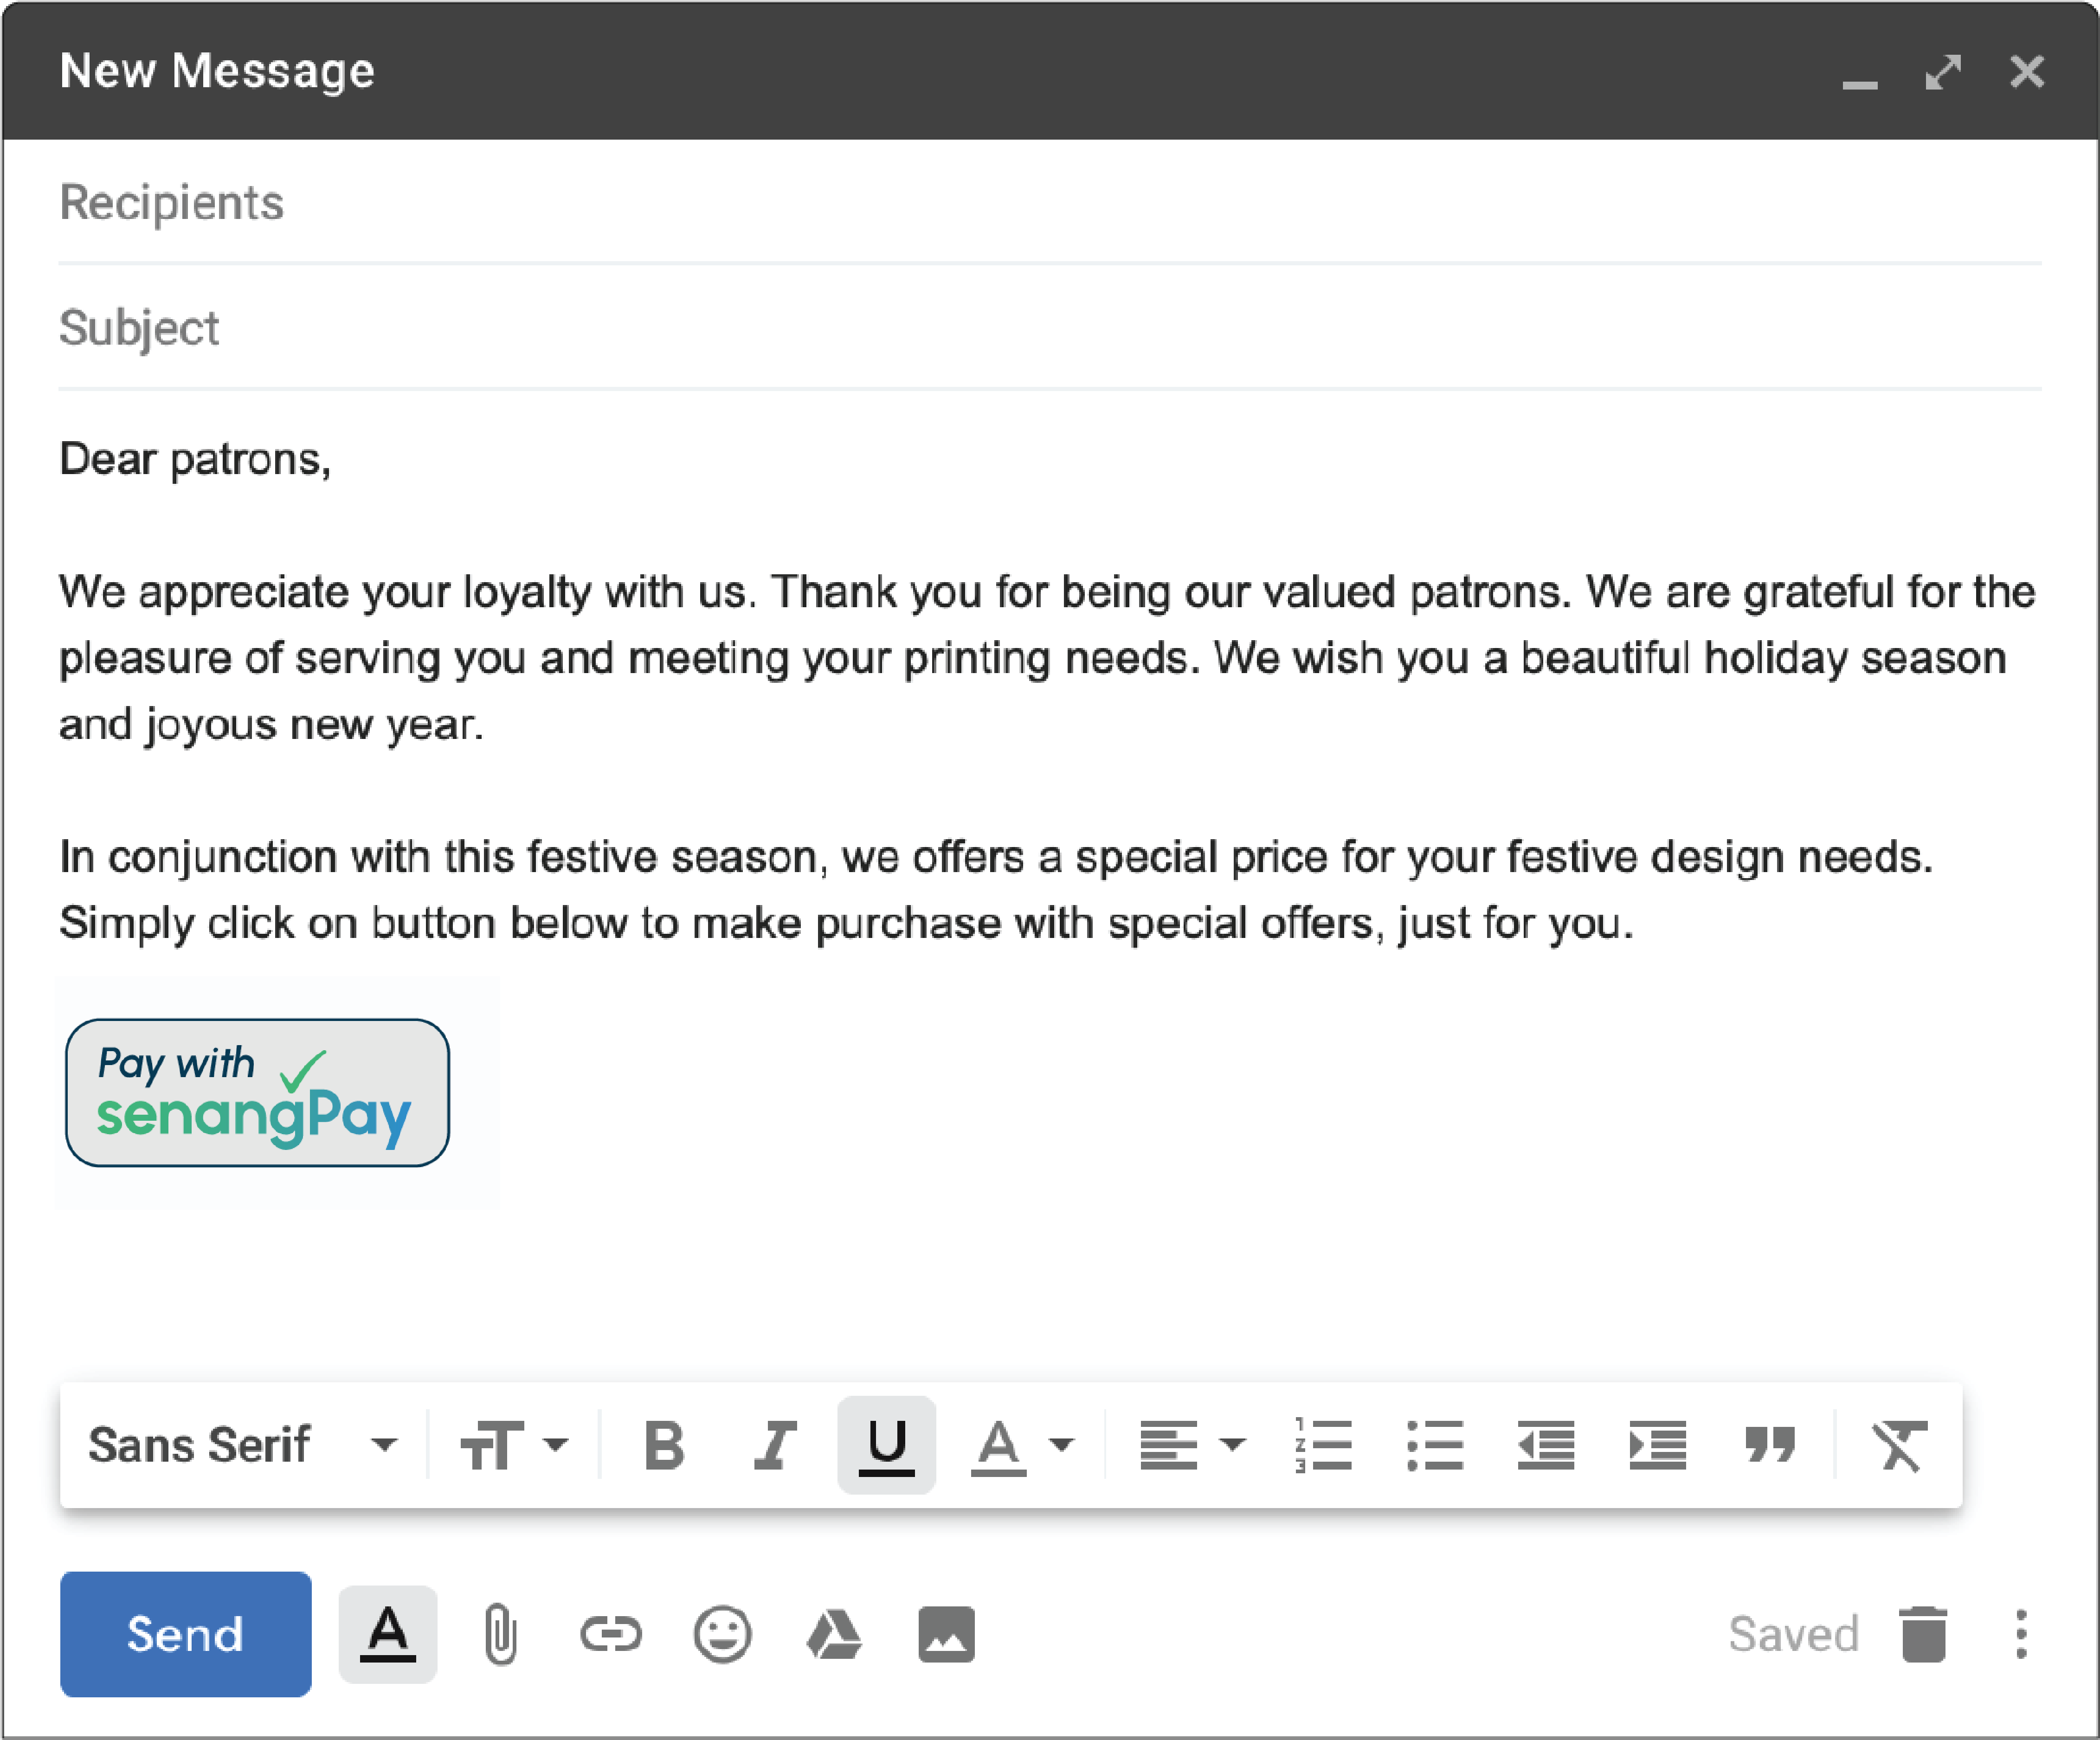 Image of email interface.